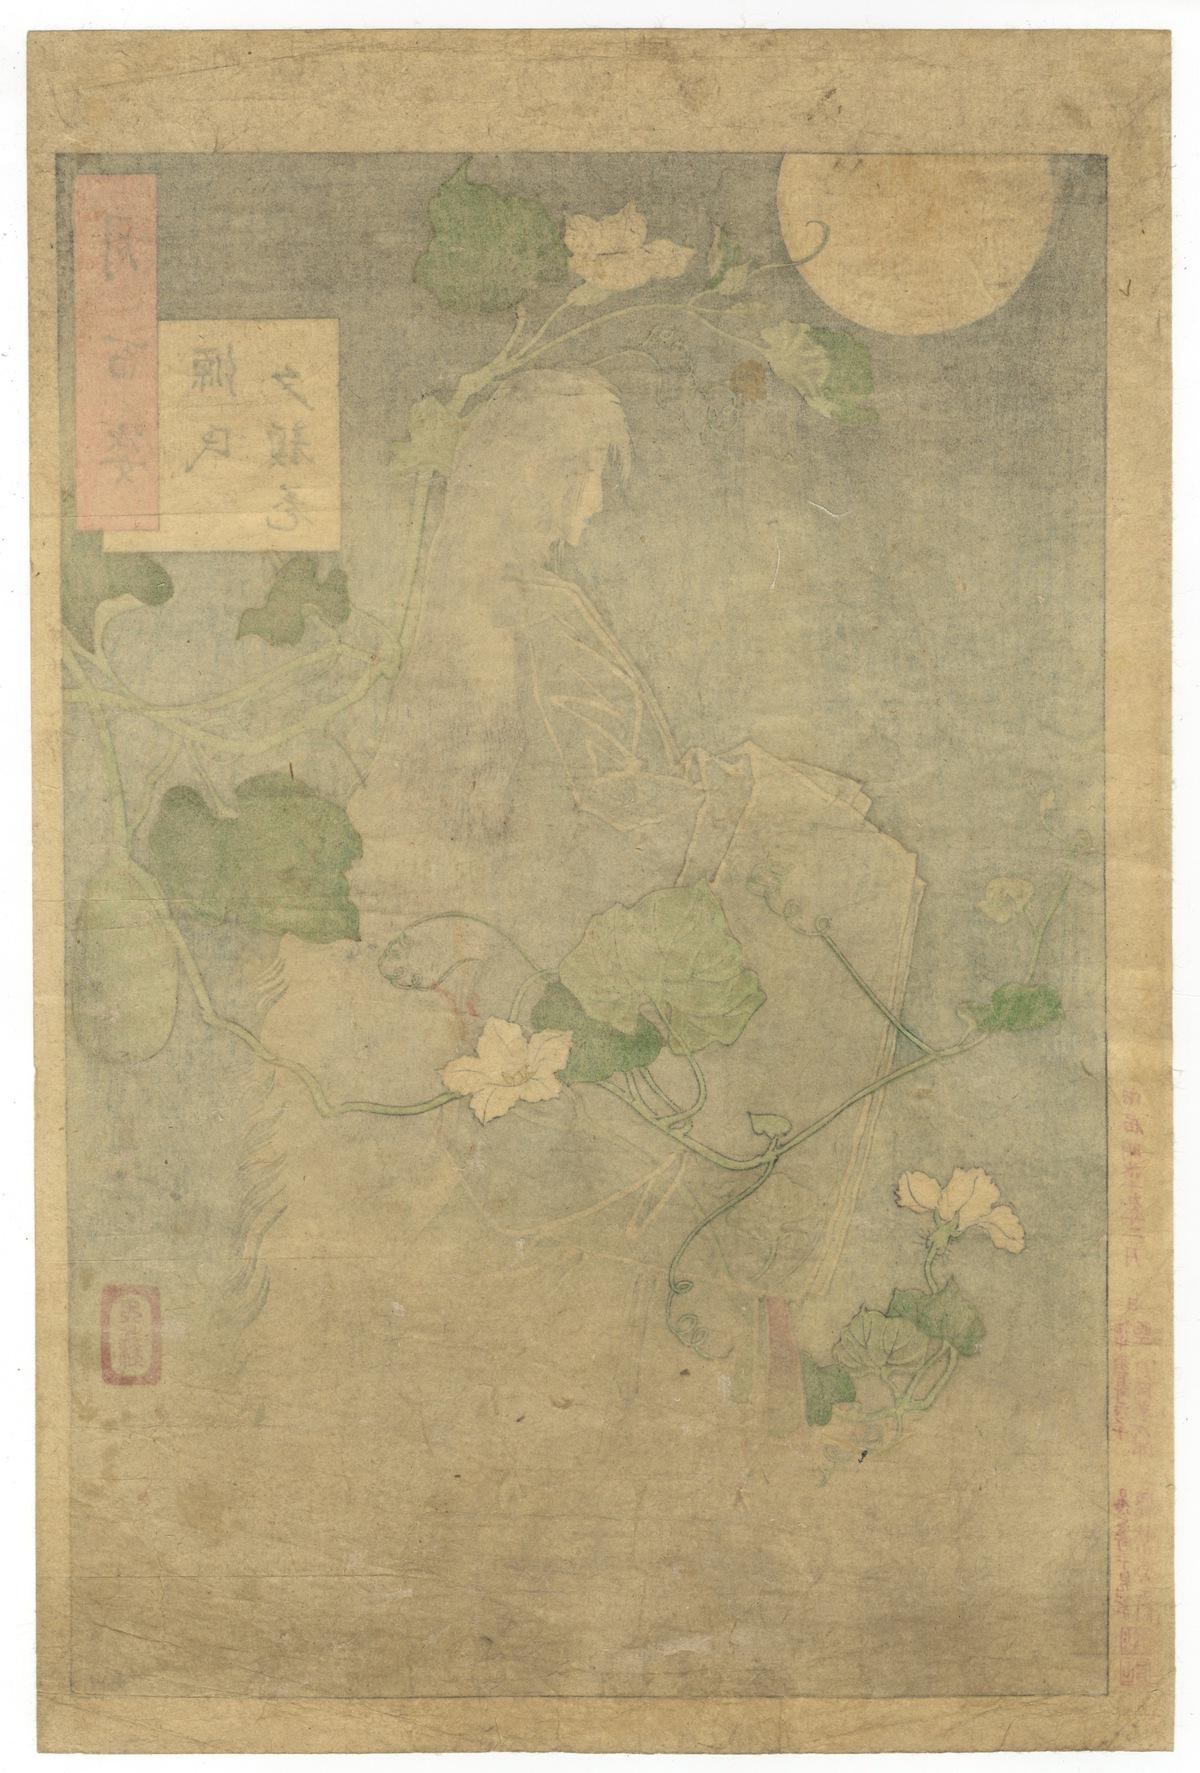 Artist: Yoshitoshi Tsukioka (1839–1892)
Title: The Yugao Chapter from ‘The Tale of Genji’
Series: Tsuki Hyakushi (One Hundred Aspects of the Moon)
Publisher: Akiyama Buemon
Date: 1886
Dimensions: 36.4 x 24.3 cm
Condition: Some creases, some